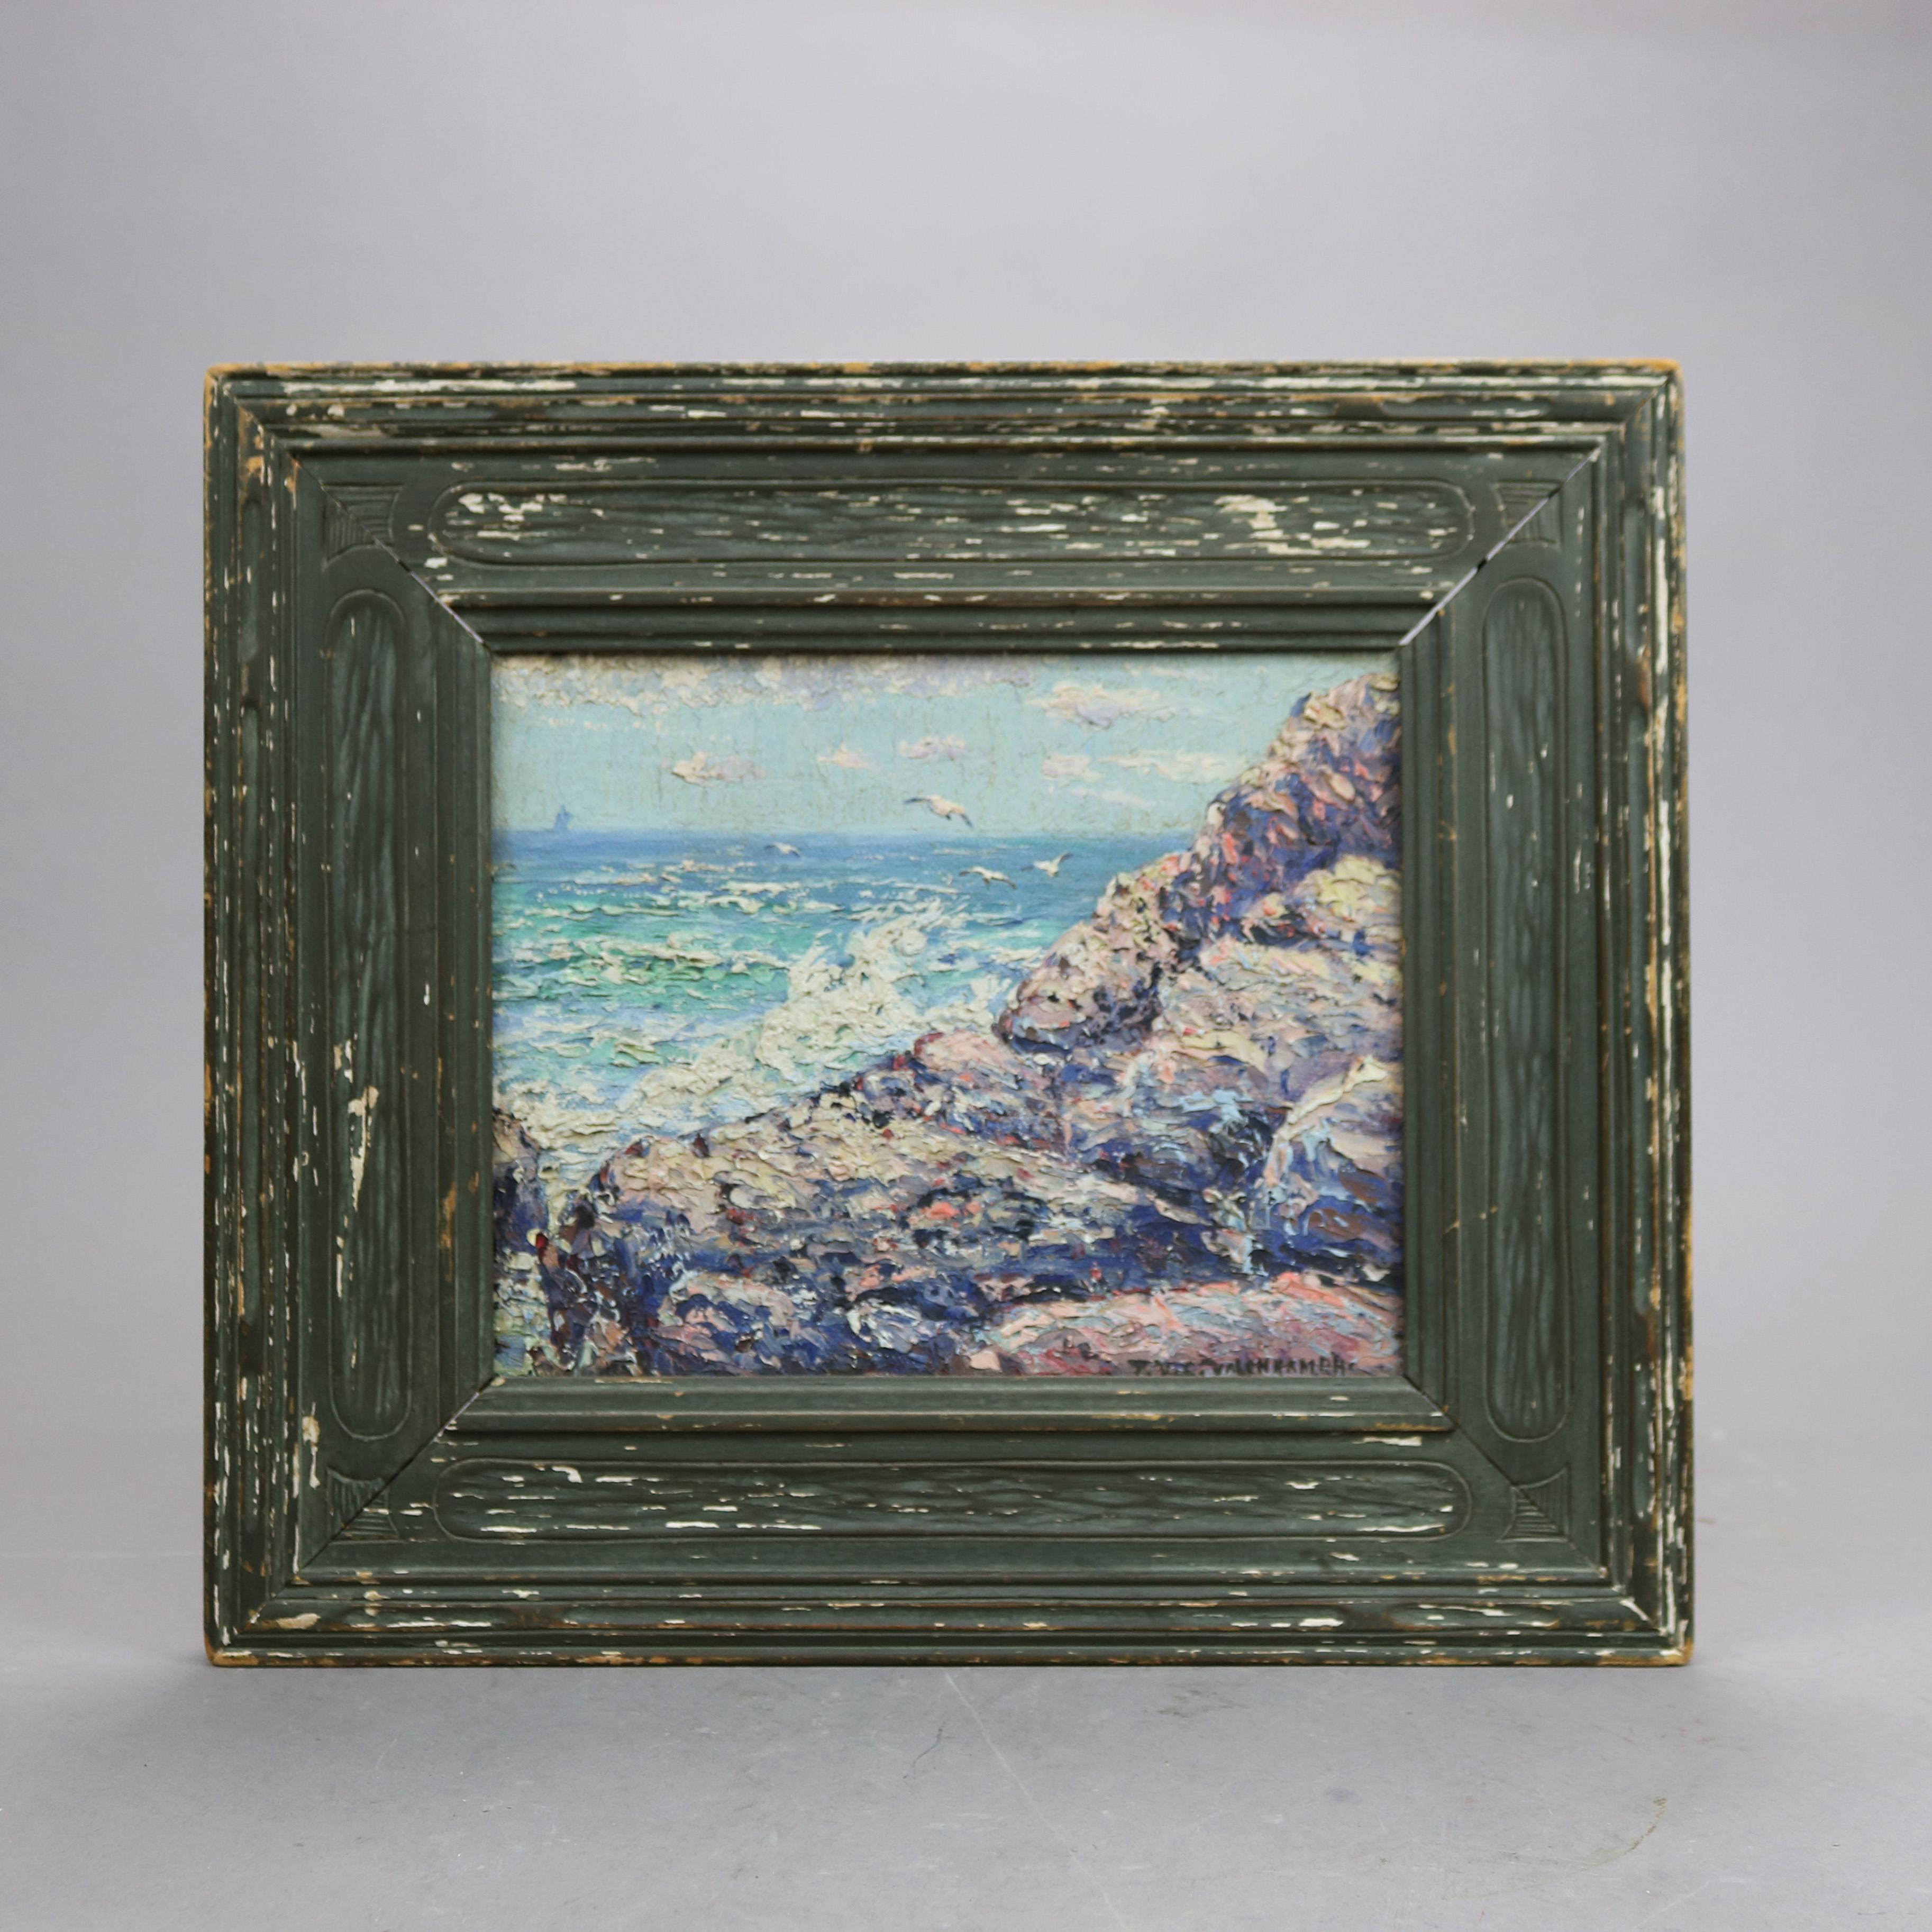 An antique impressionistic painting in the manner of New Hope School offers oil on board coastal seascape scene with rocky shore and seagulls, artist signed lower right, seated in painted wood frame, c1920

Measures - 13.75'' H x 15.75'' W x 1.5''